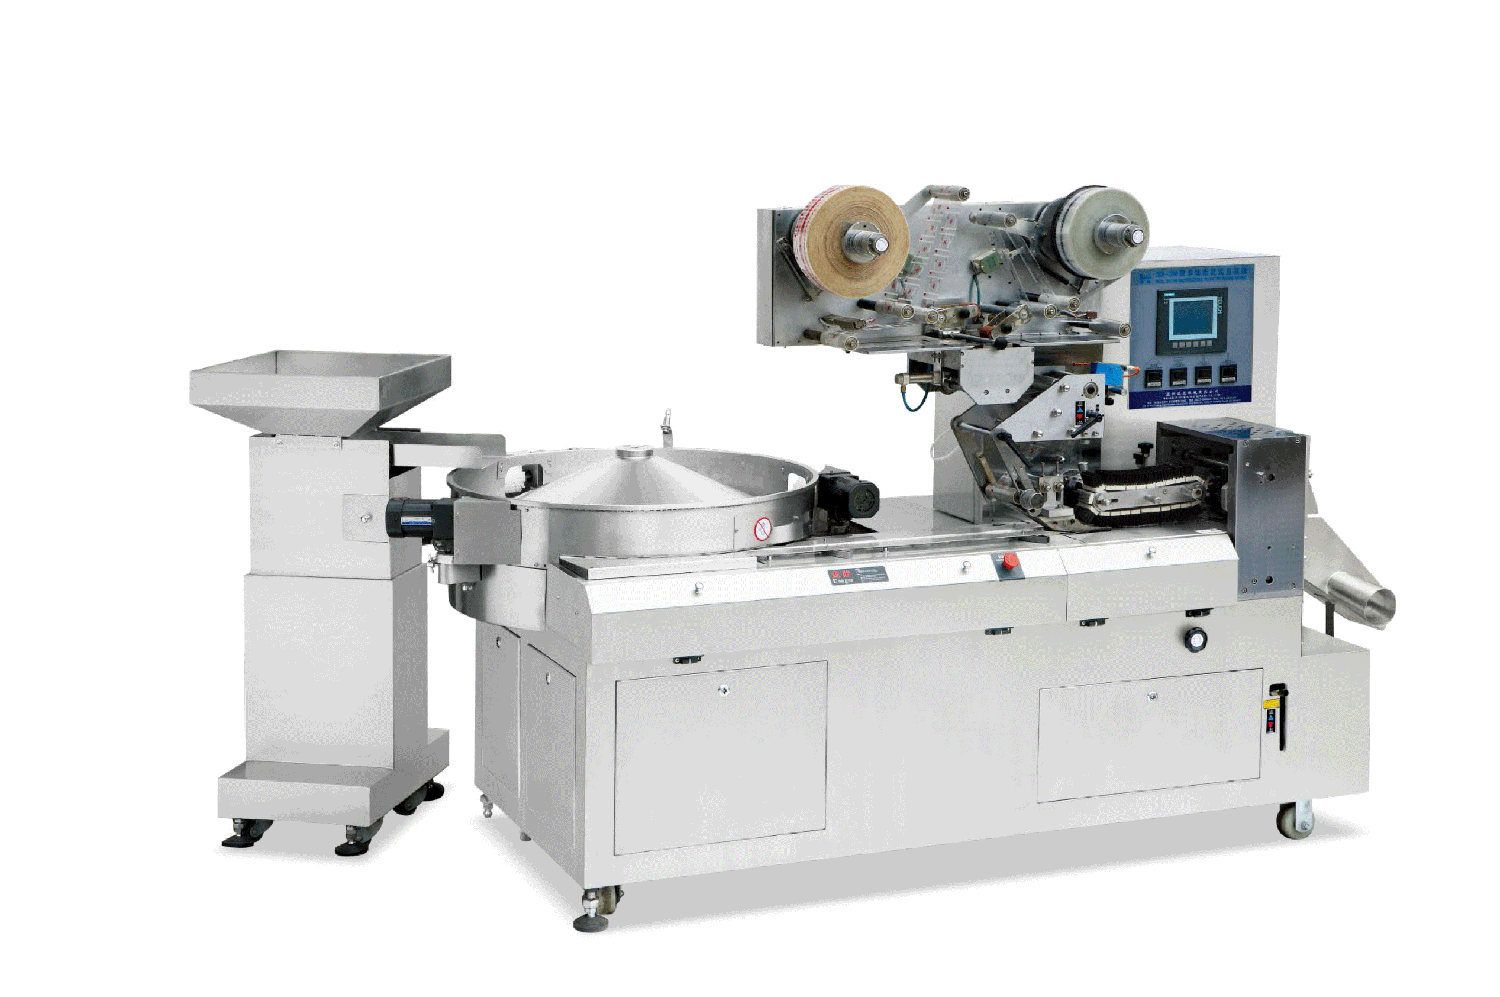 DXD-1200 Pillow Type Candy Packaging Machine